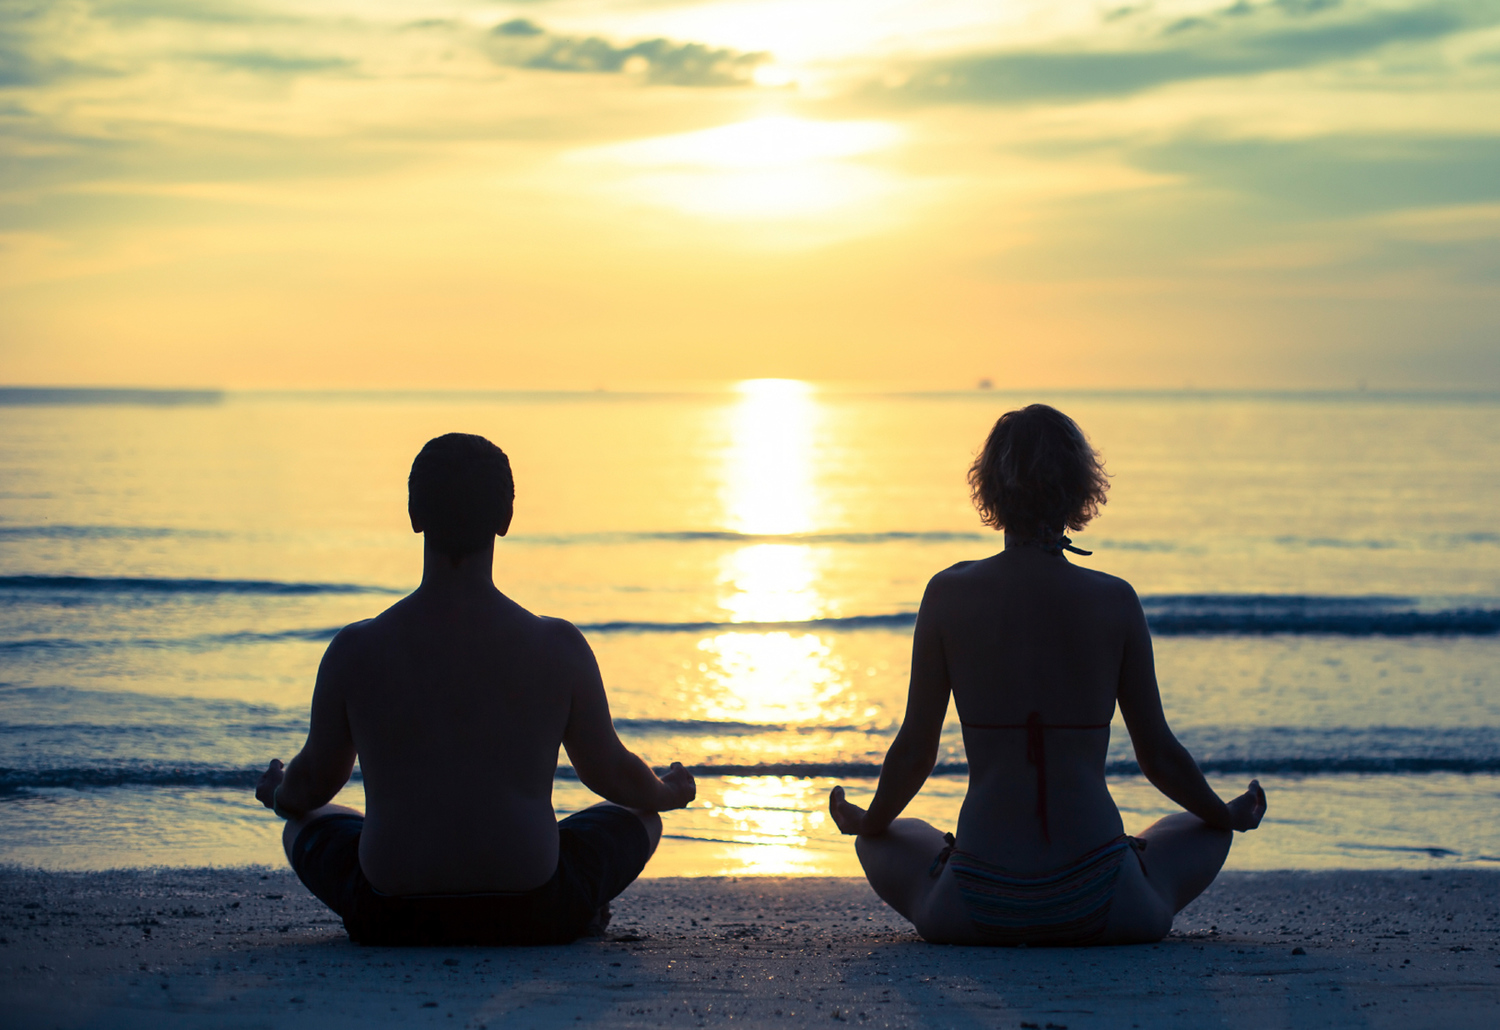 Meditation Goes Beyond Just a Religious Exercise